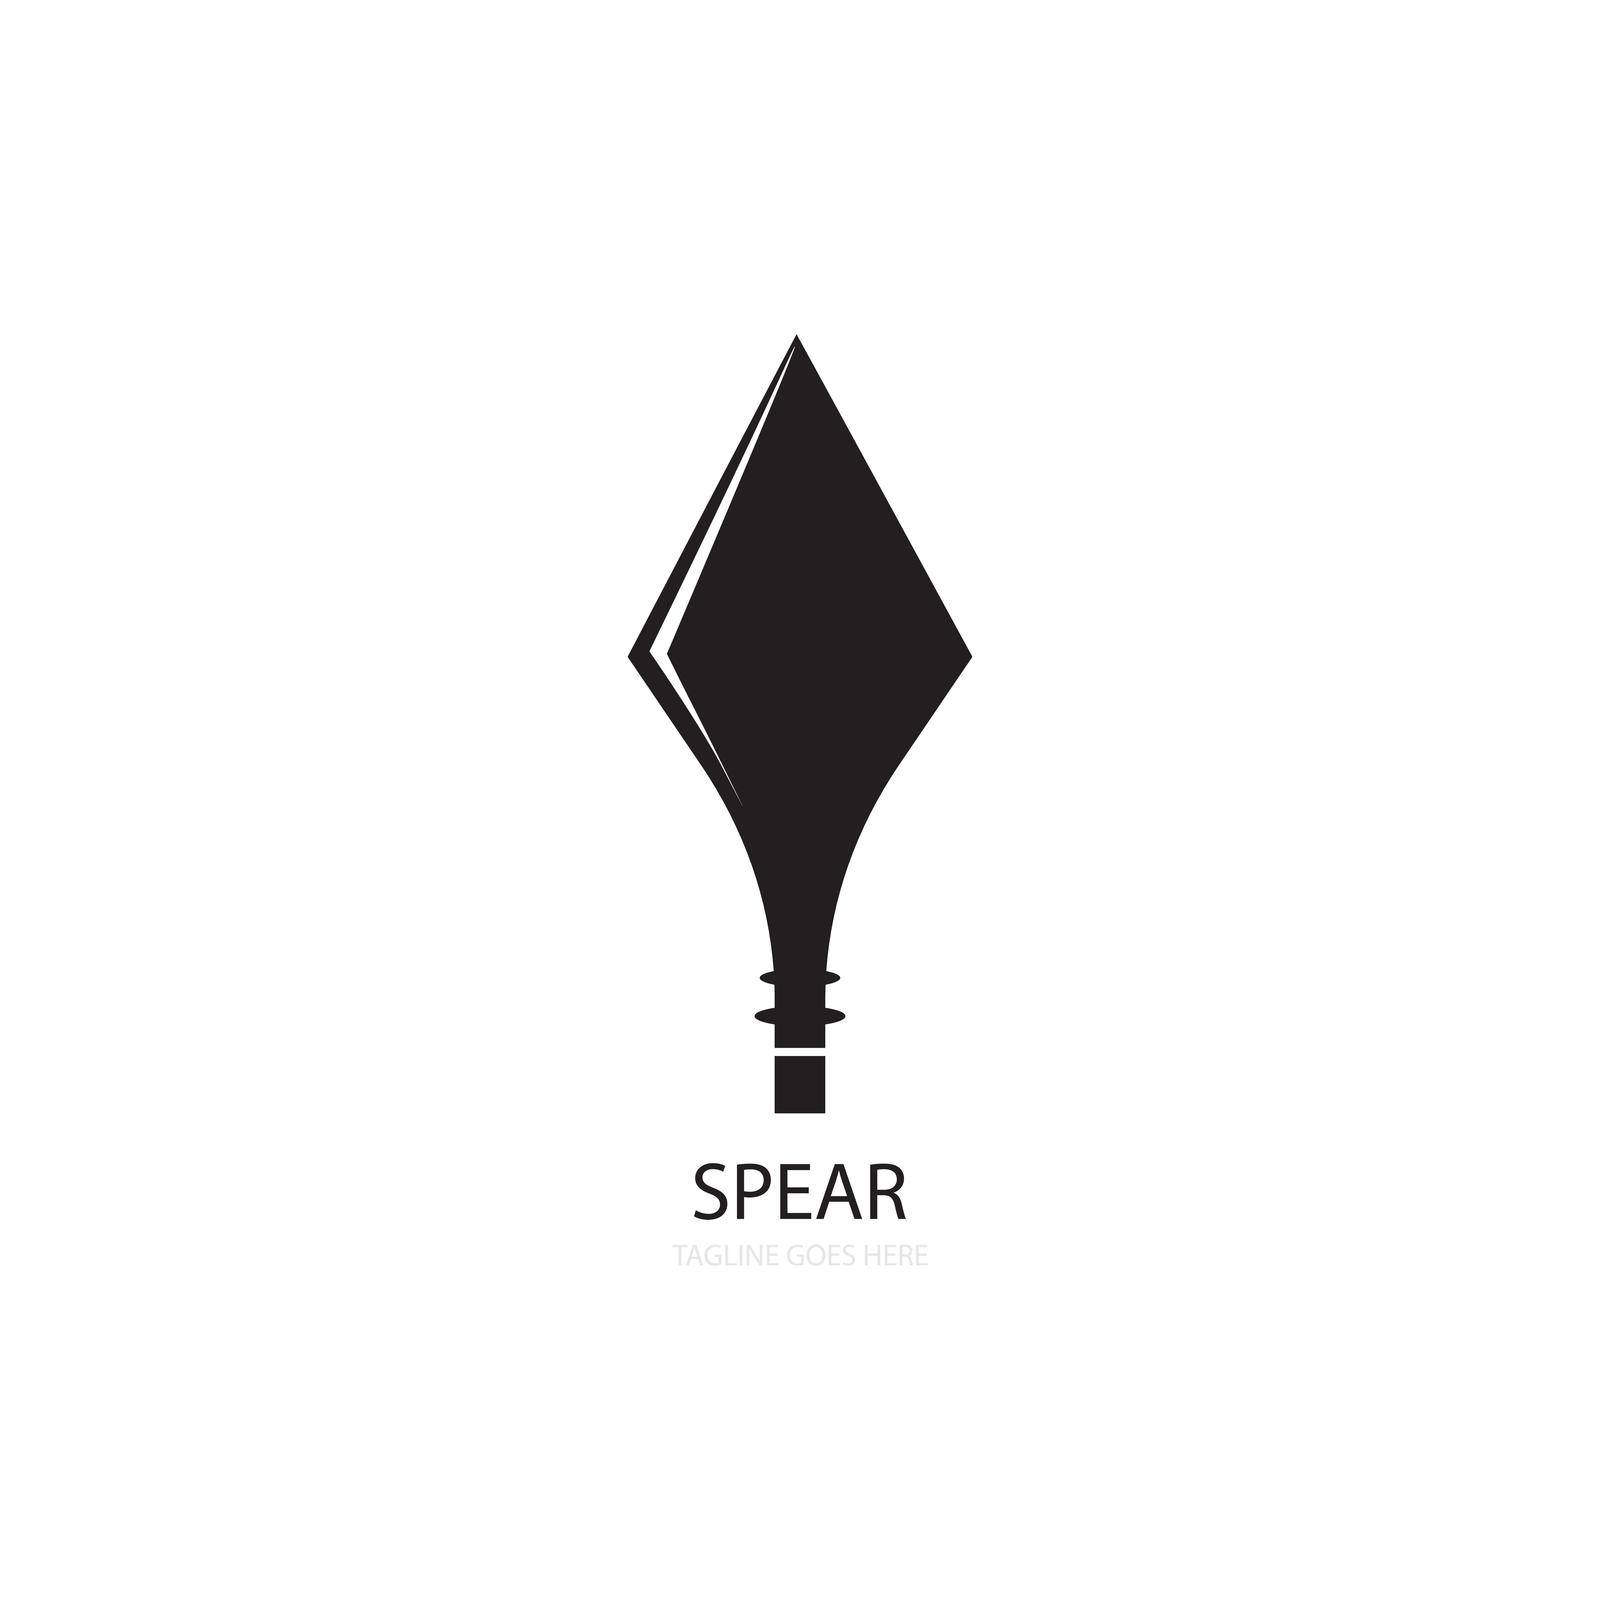 Spear icon logo free vector  by ABD03